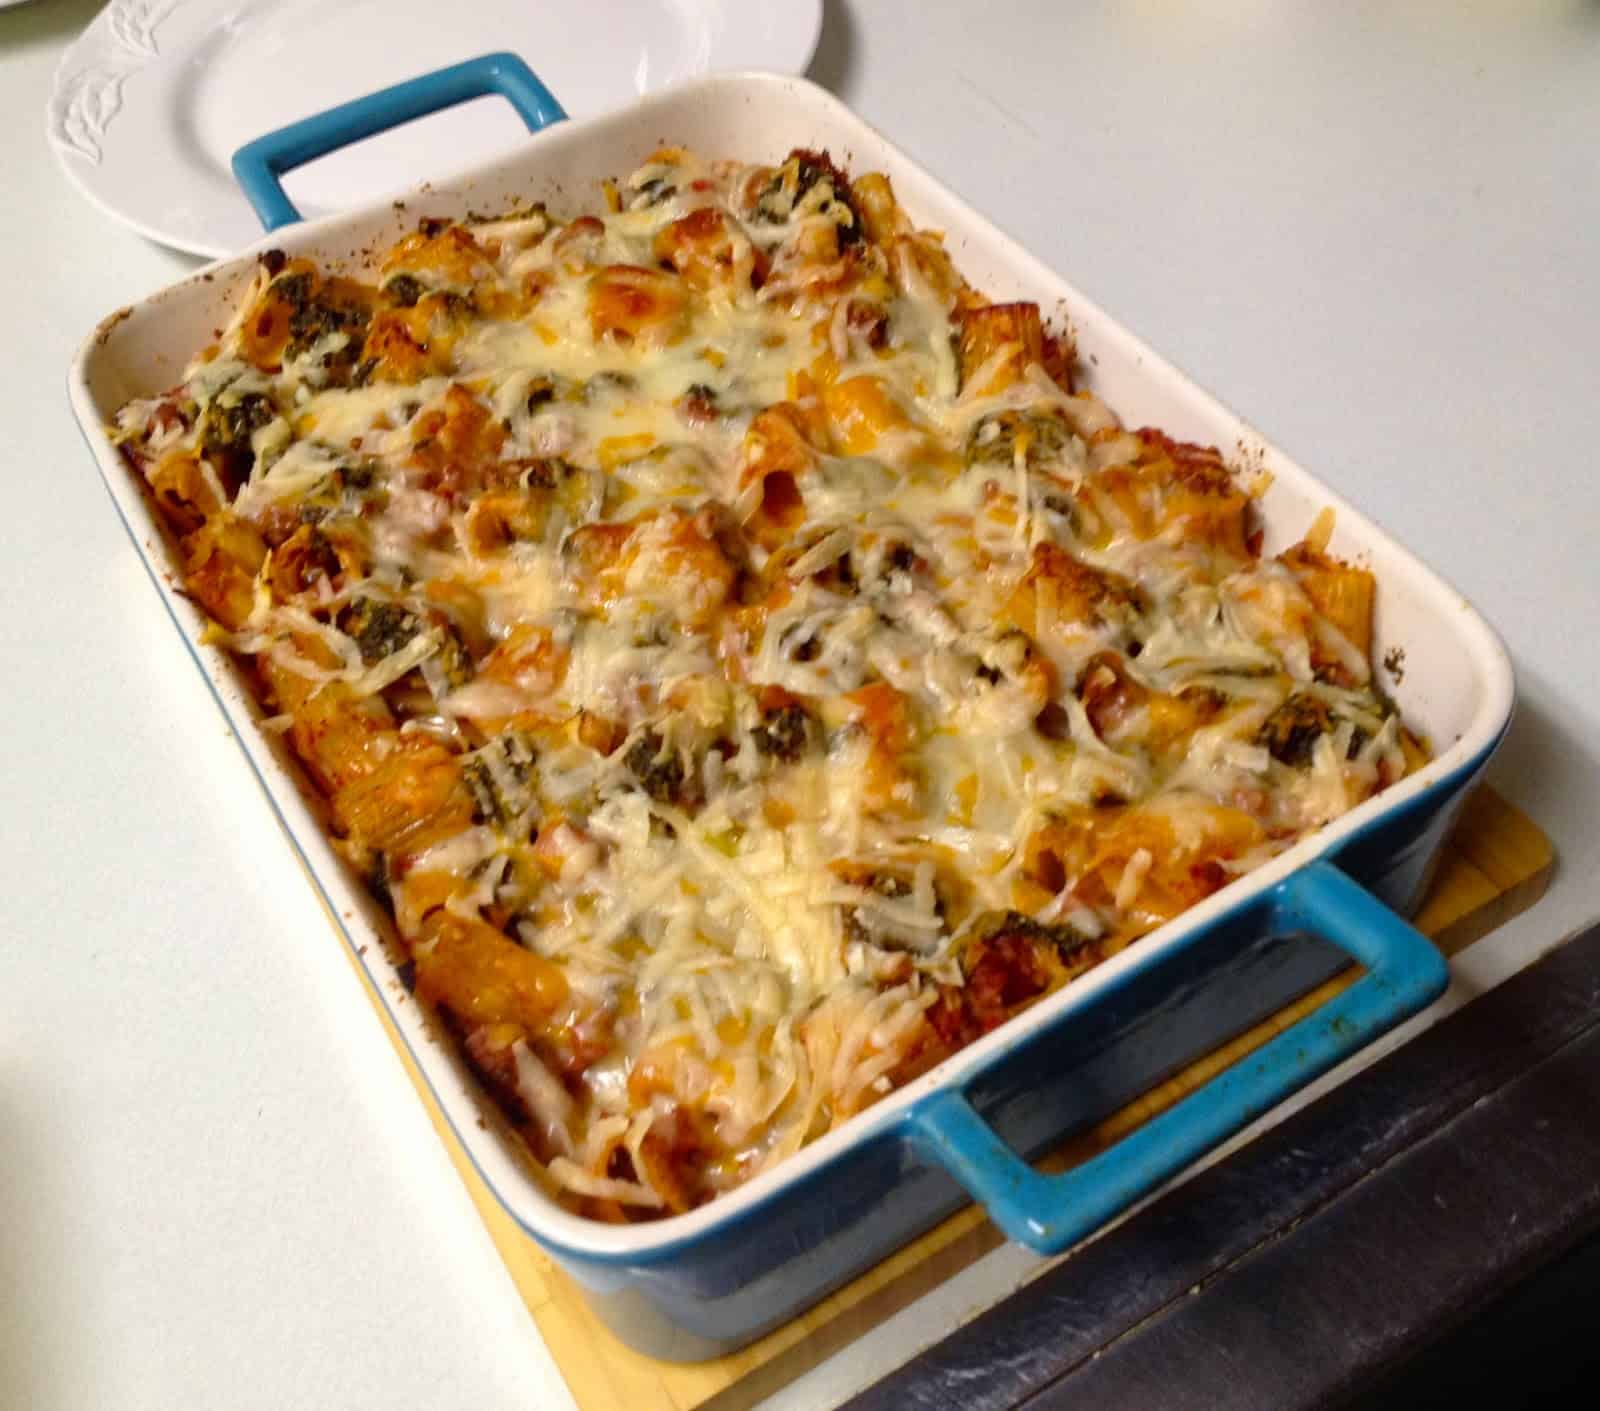 Baked Pasta with Pesto, Cheese and Meat Sauce